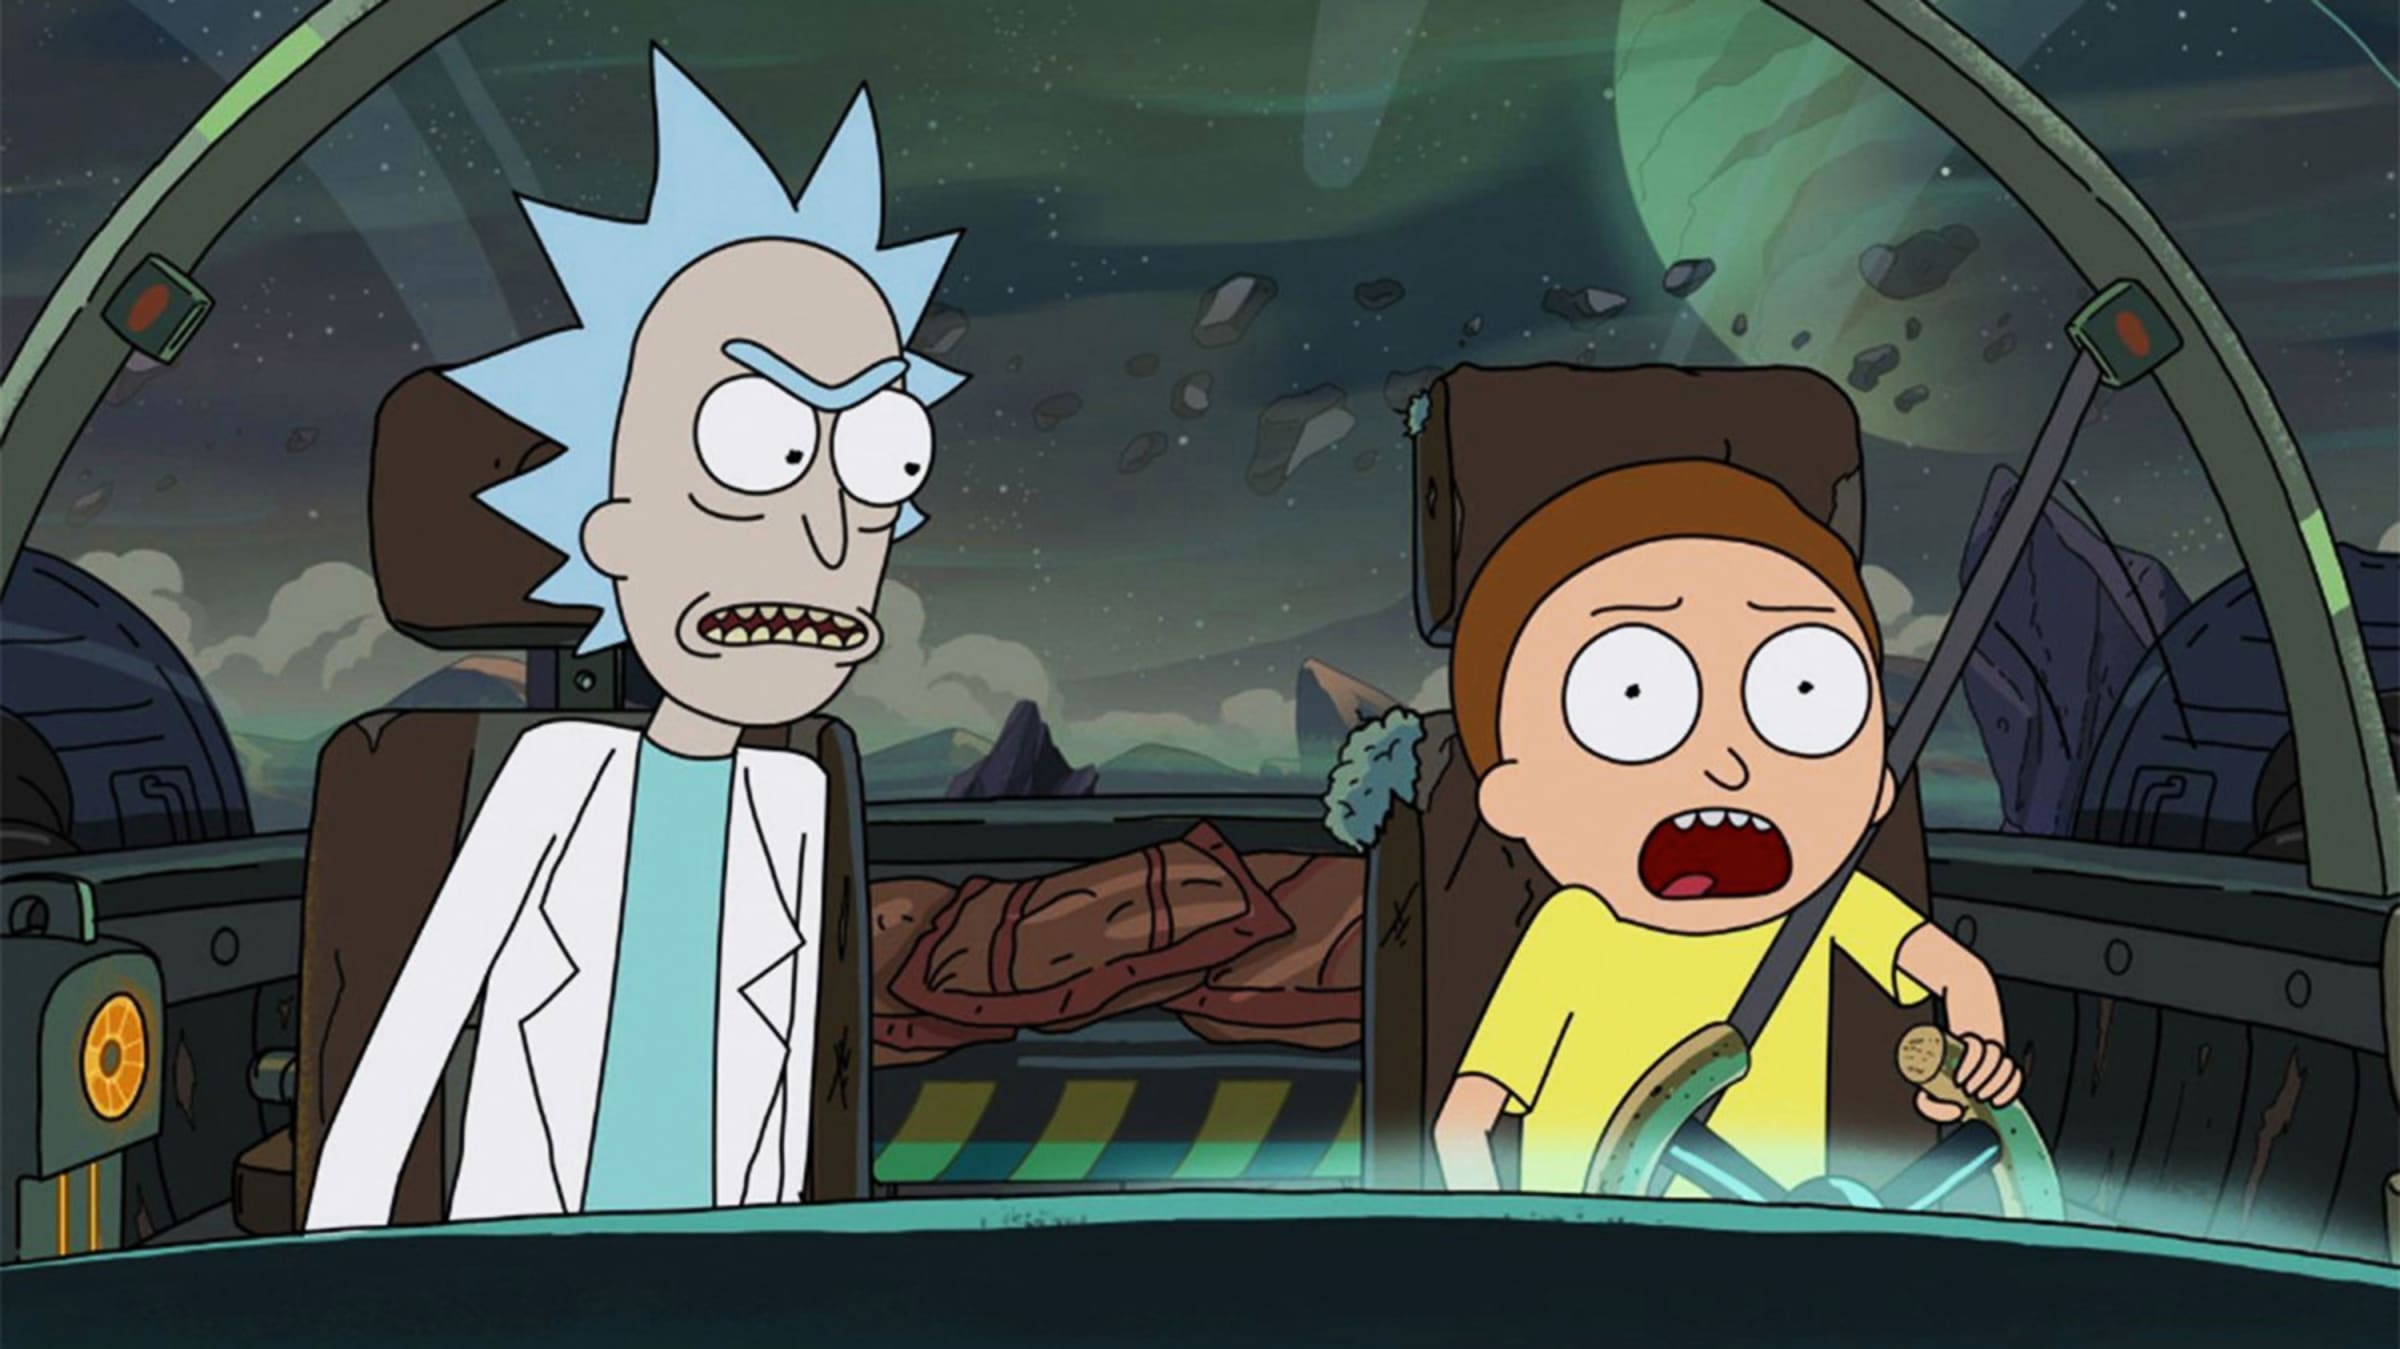 watch rick and morty online season 3 episode 3 free